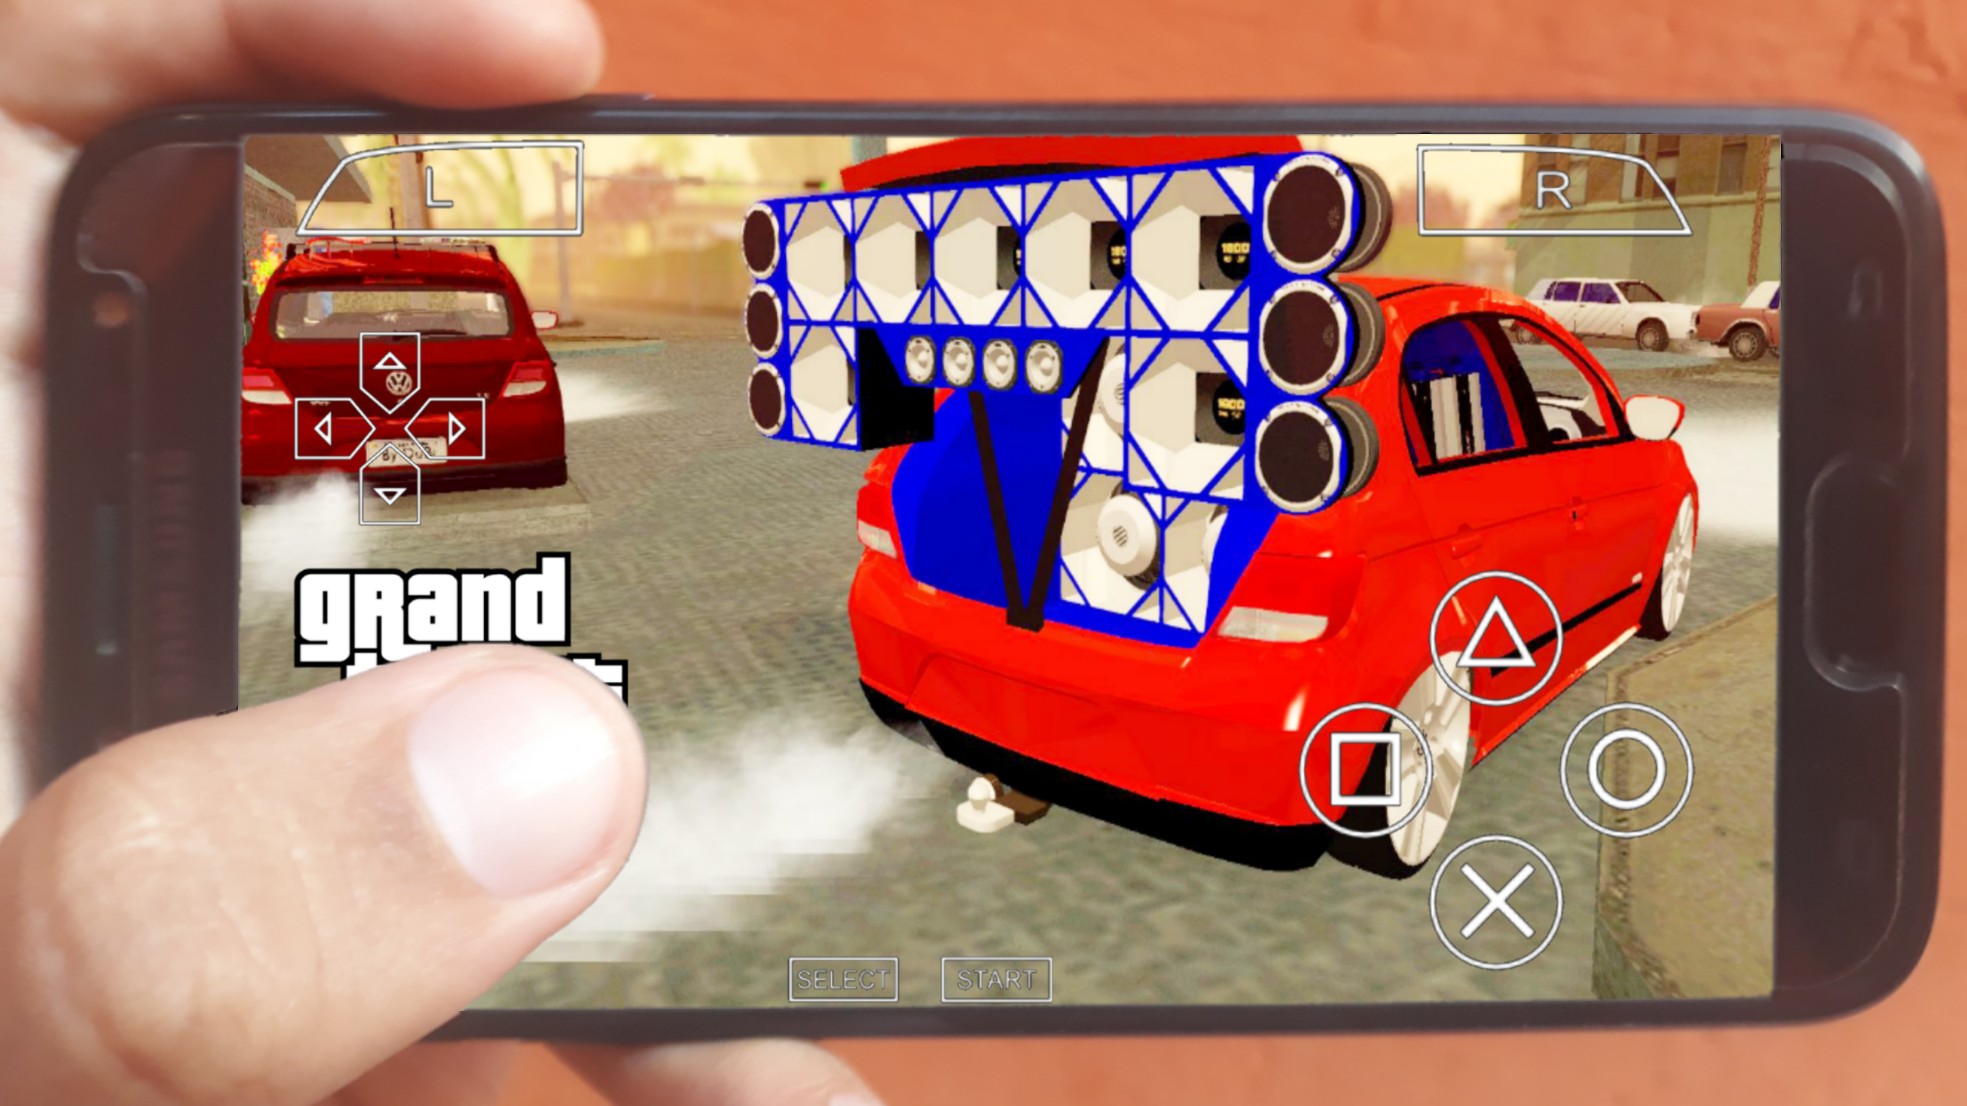 Gta Sa Ppsspp 100Mb / (100MB) GTA 5 PPSSPP ON ANDROID MEDIAFIRE and GOOGLE DRIVE ... / (80mb ...